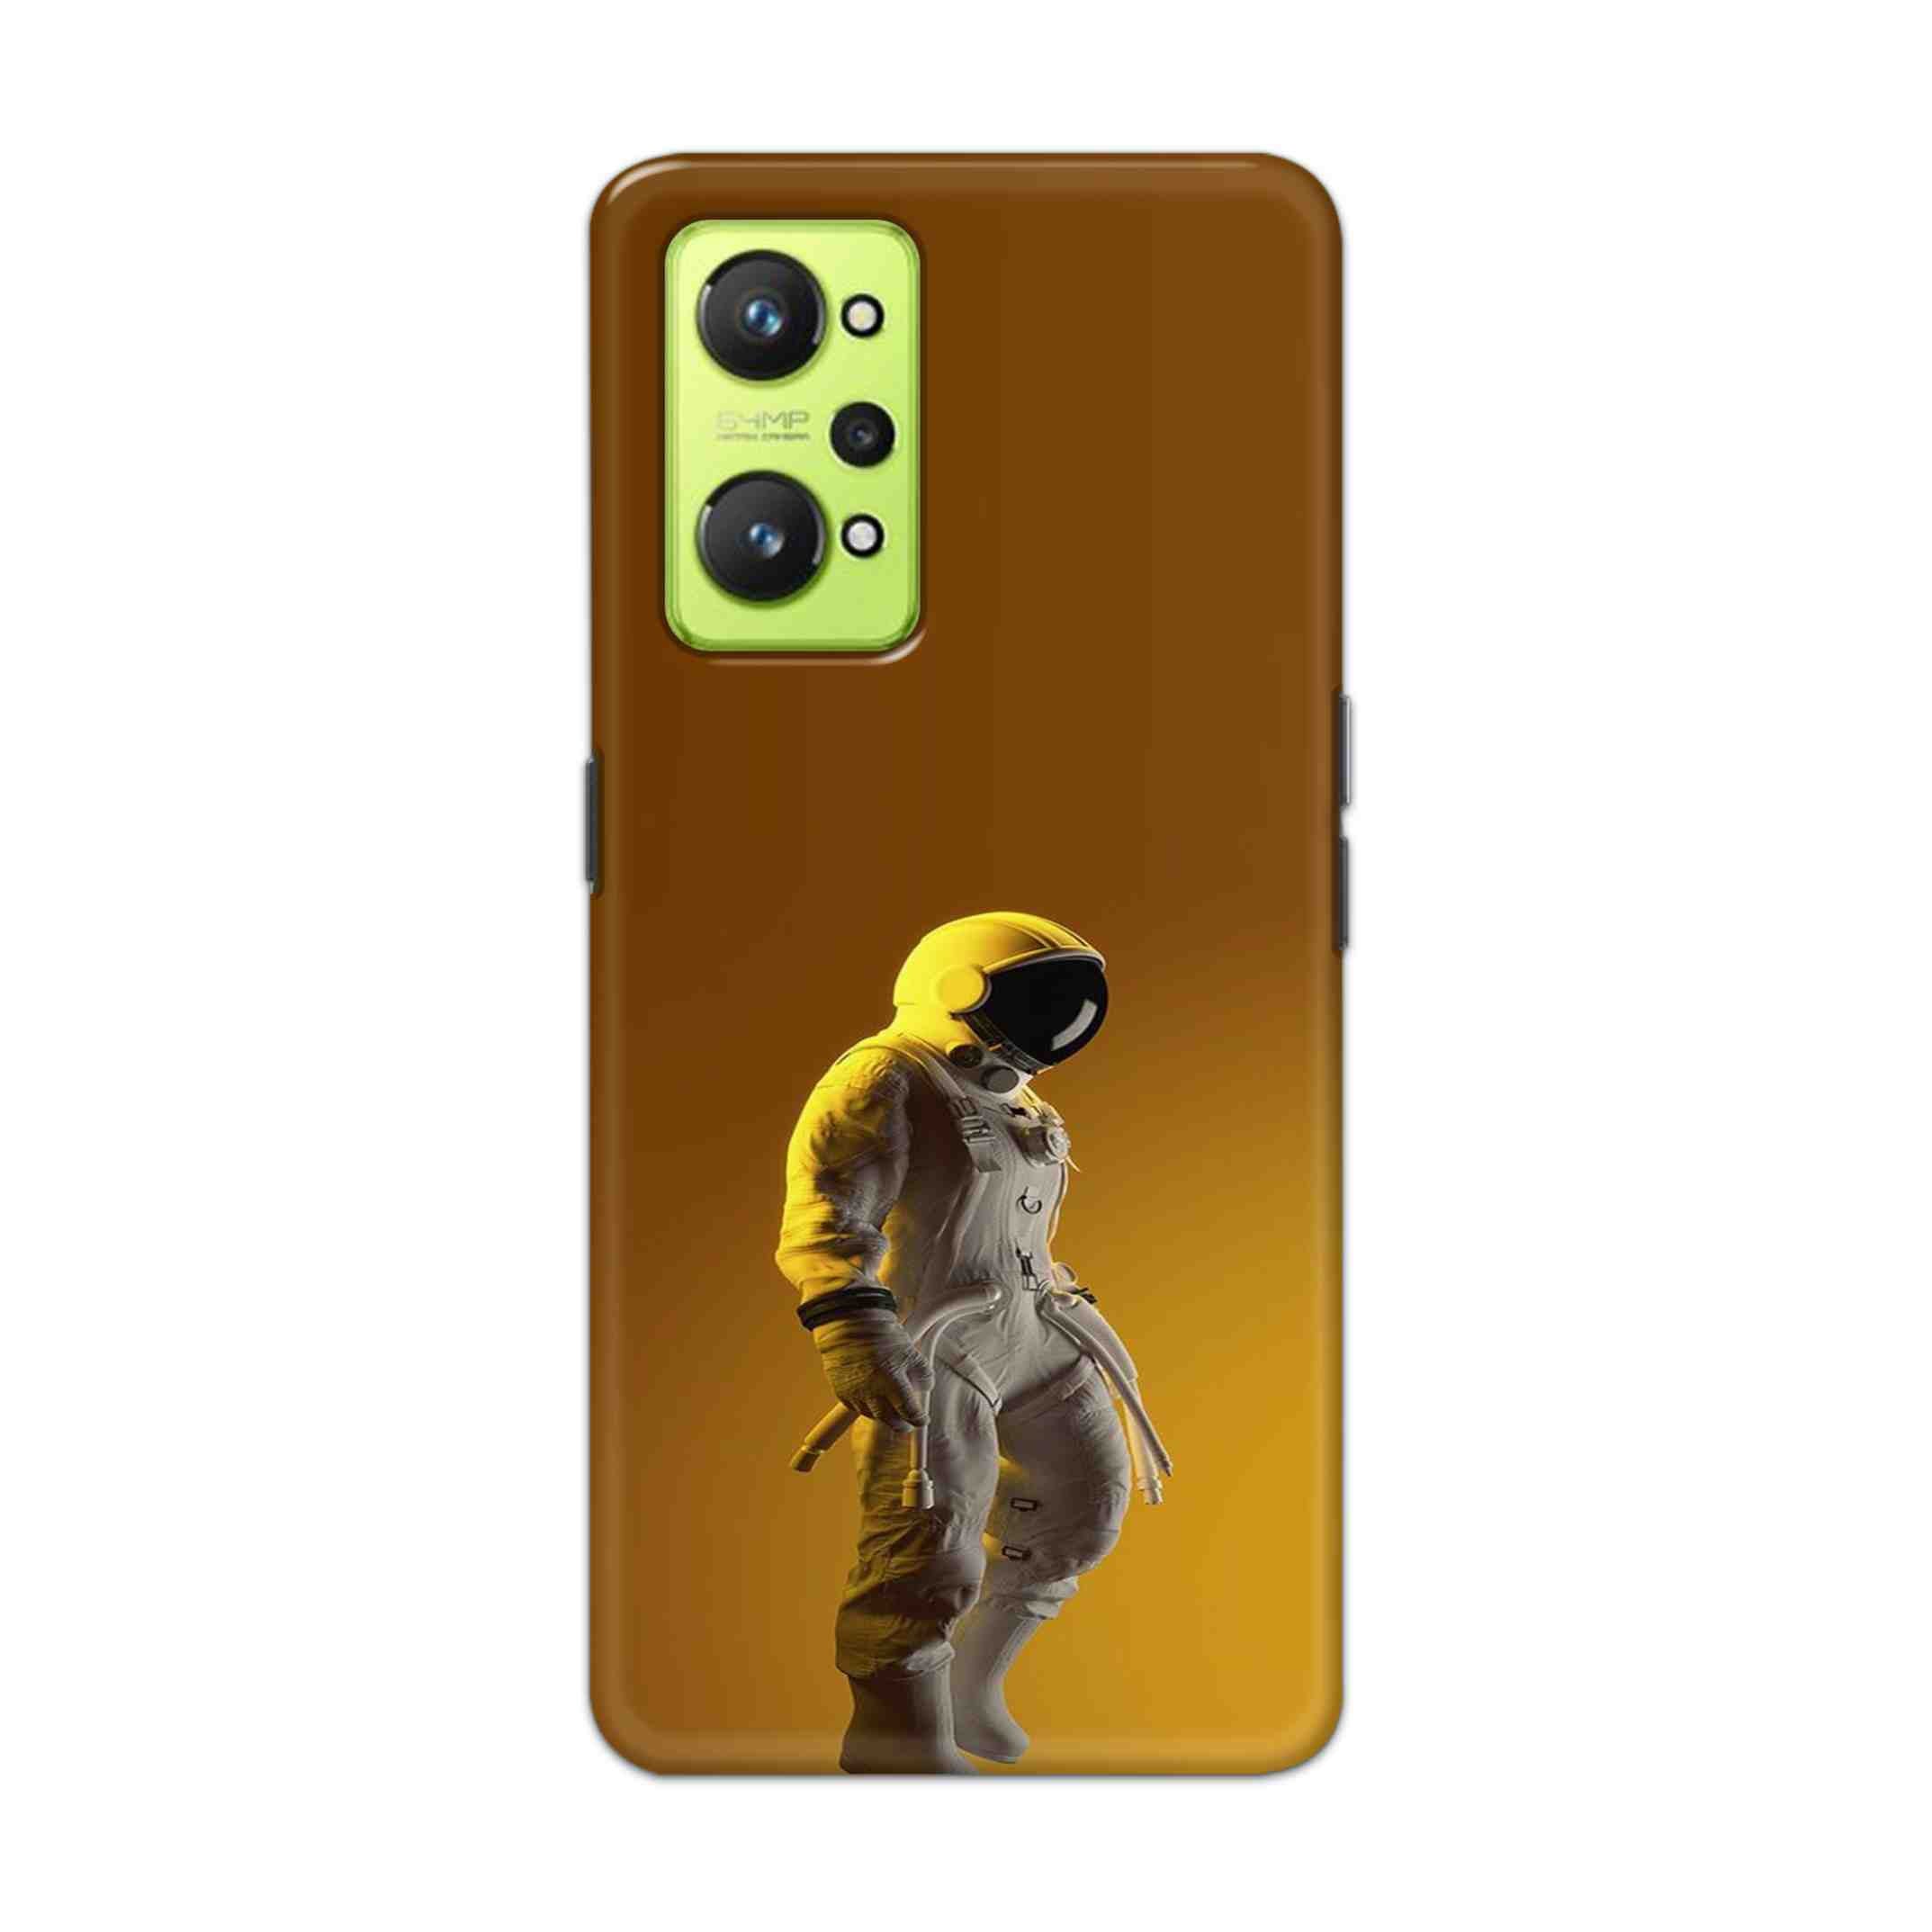 Buy Yellow Astronaut Hard Back Mobile Phone Case Cover For Realme GT Neo2 Online